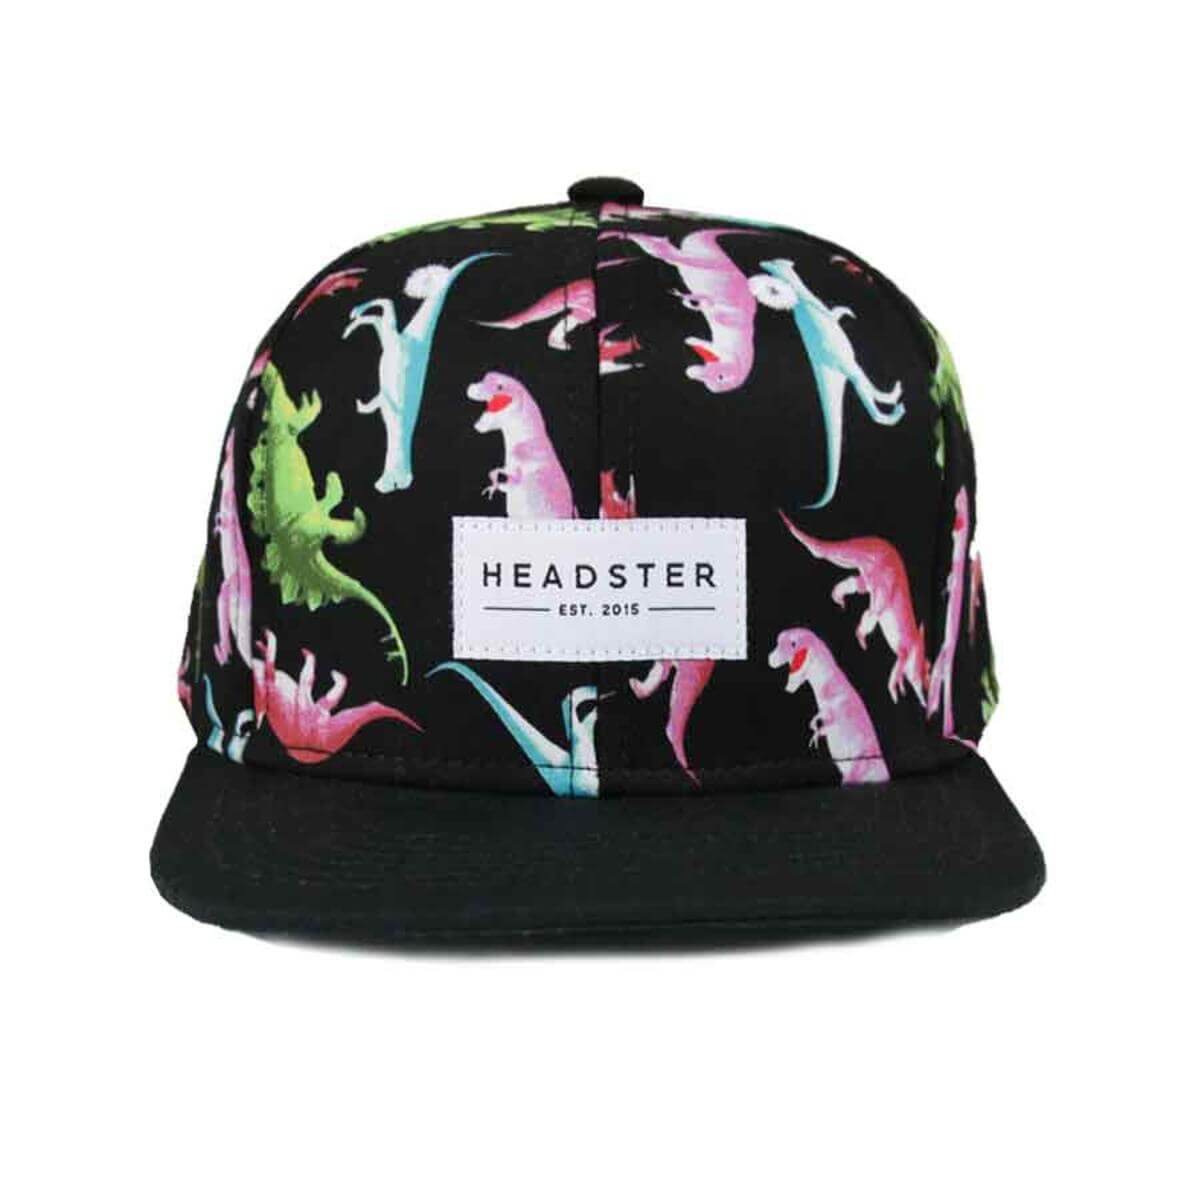 Headster - Dino